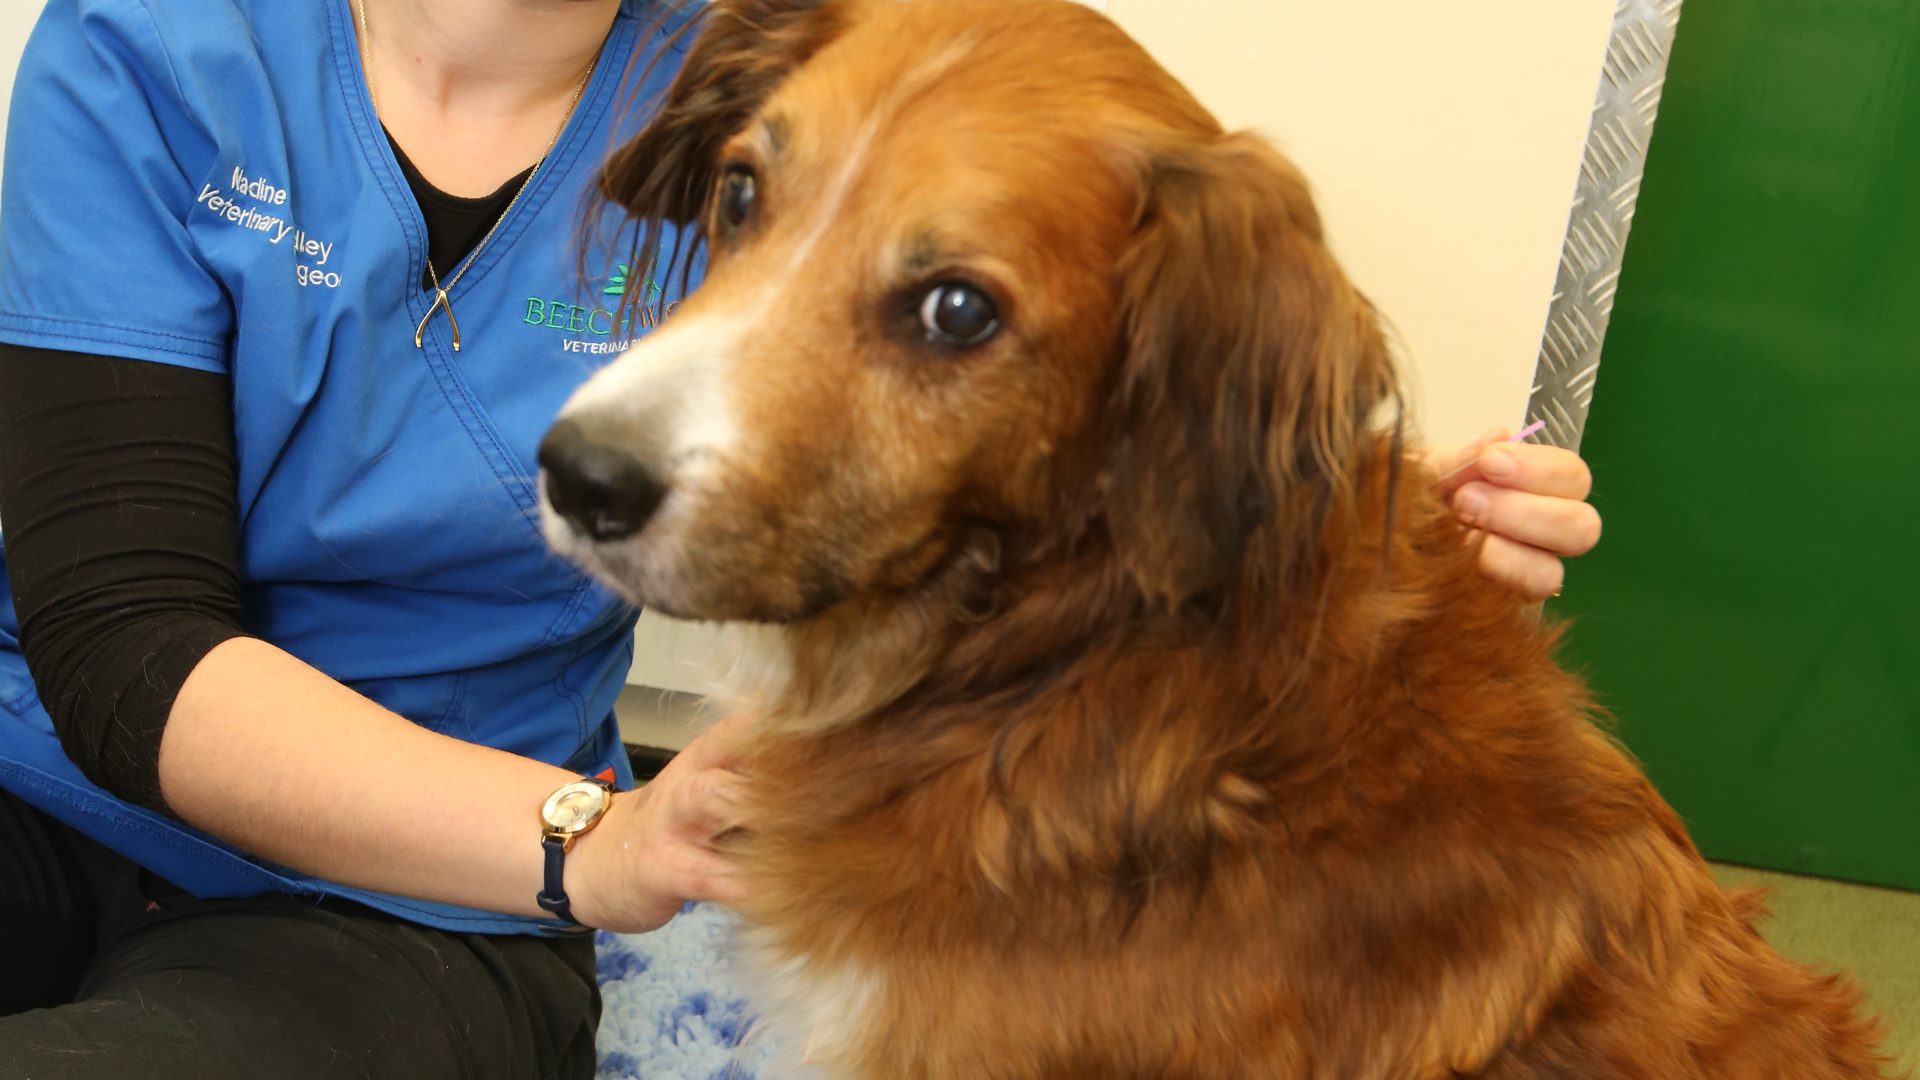 New lease of life for family pet thanks to Nadine’s healing hands